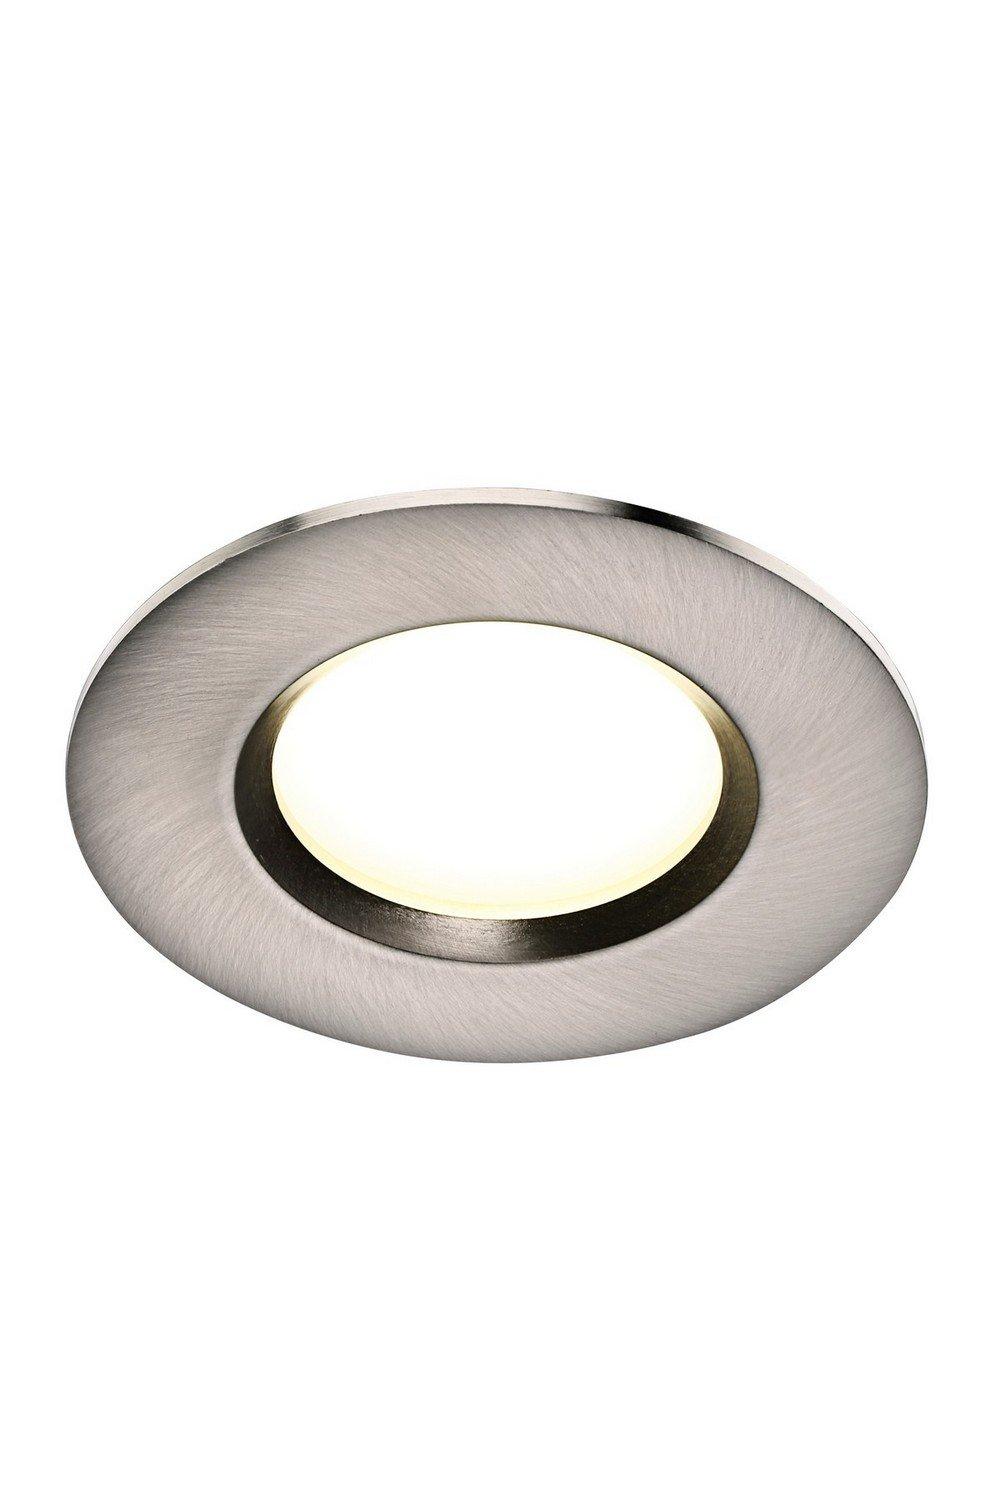 Clarkson 3 Pack LED Recessed Downlight Brushed Steel 4000K